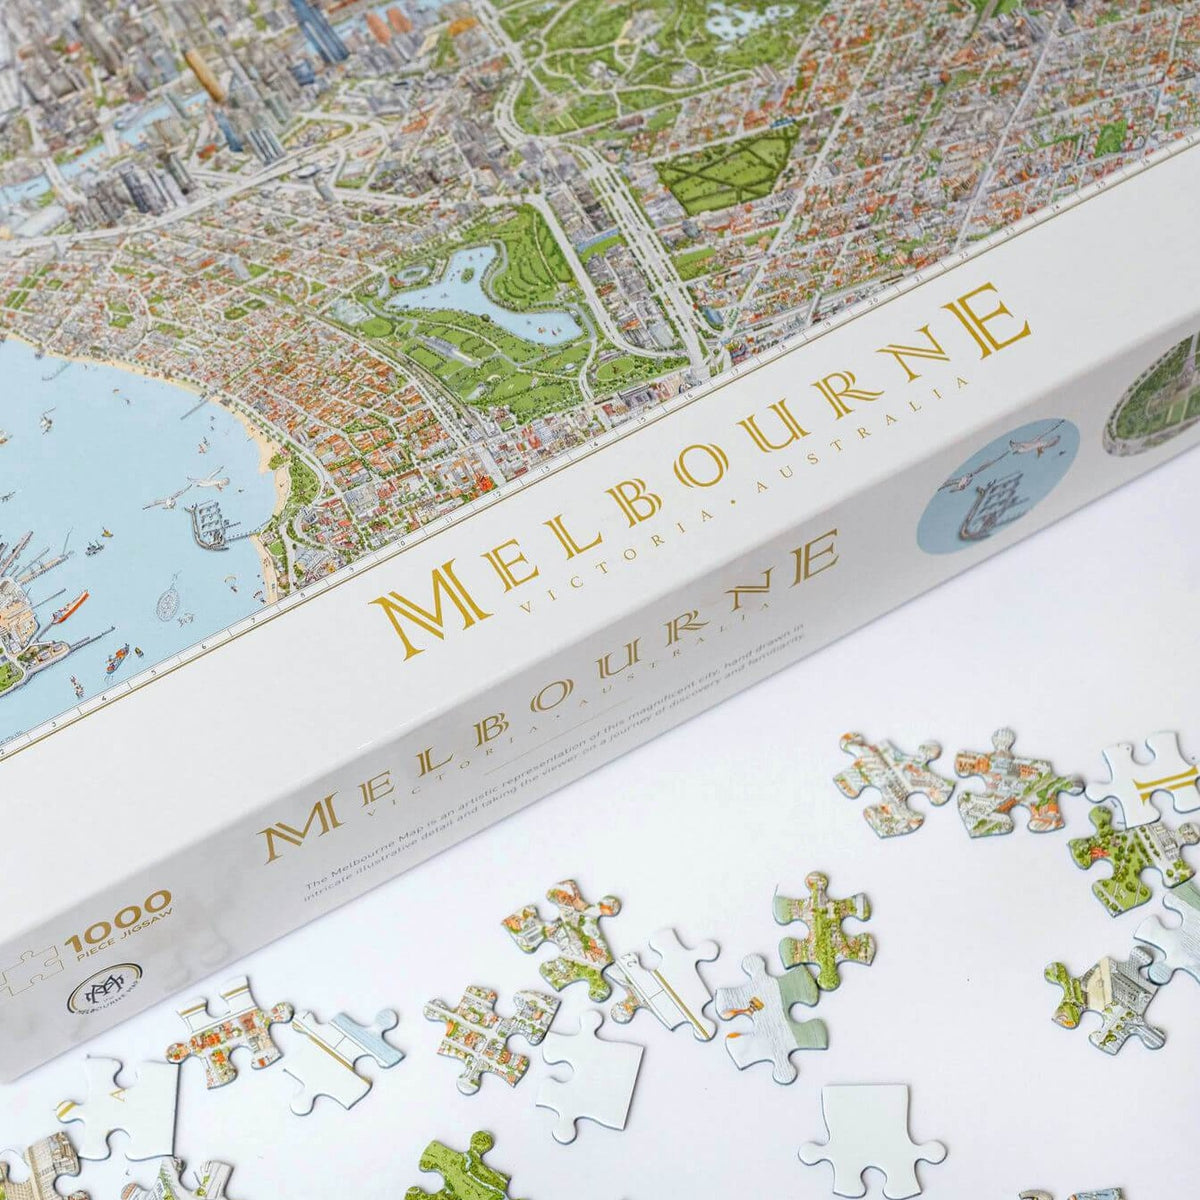 The Melbourne Map 1,000-piece jigsaw puzzle on a white table showing the bottom left corner of the box and some loose pieces